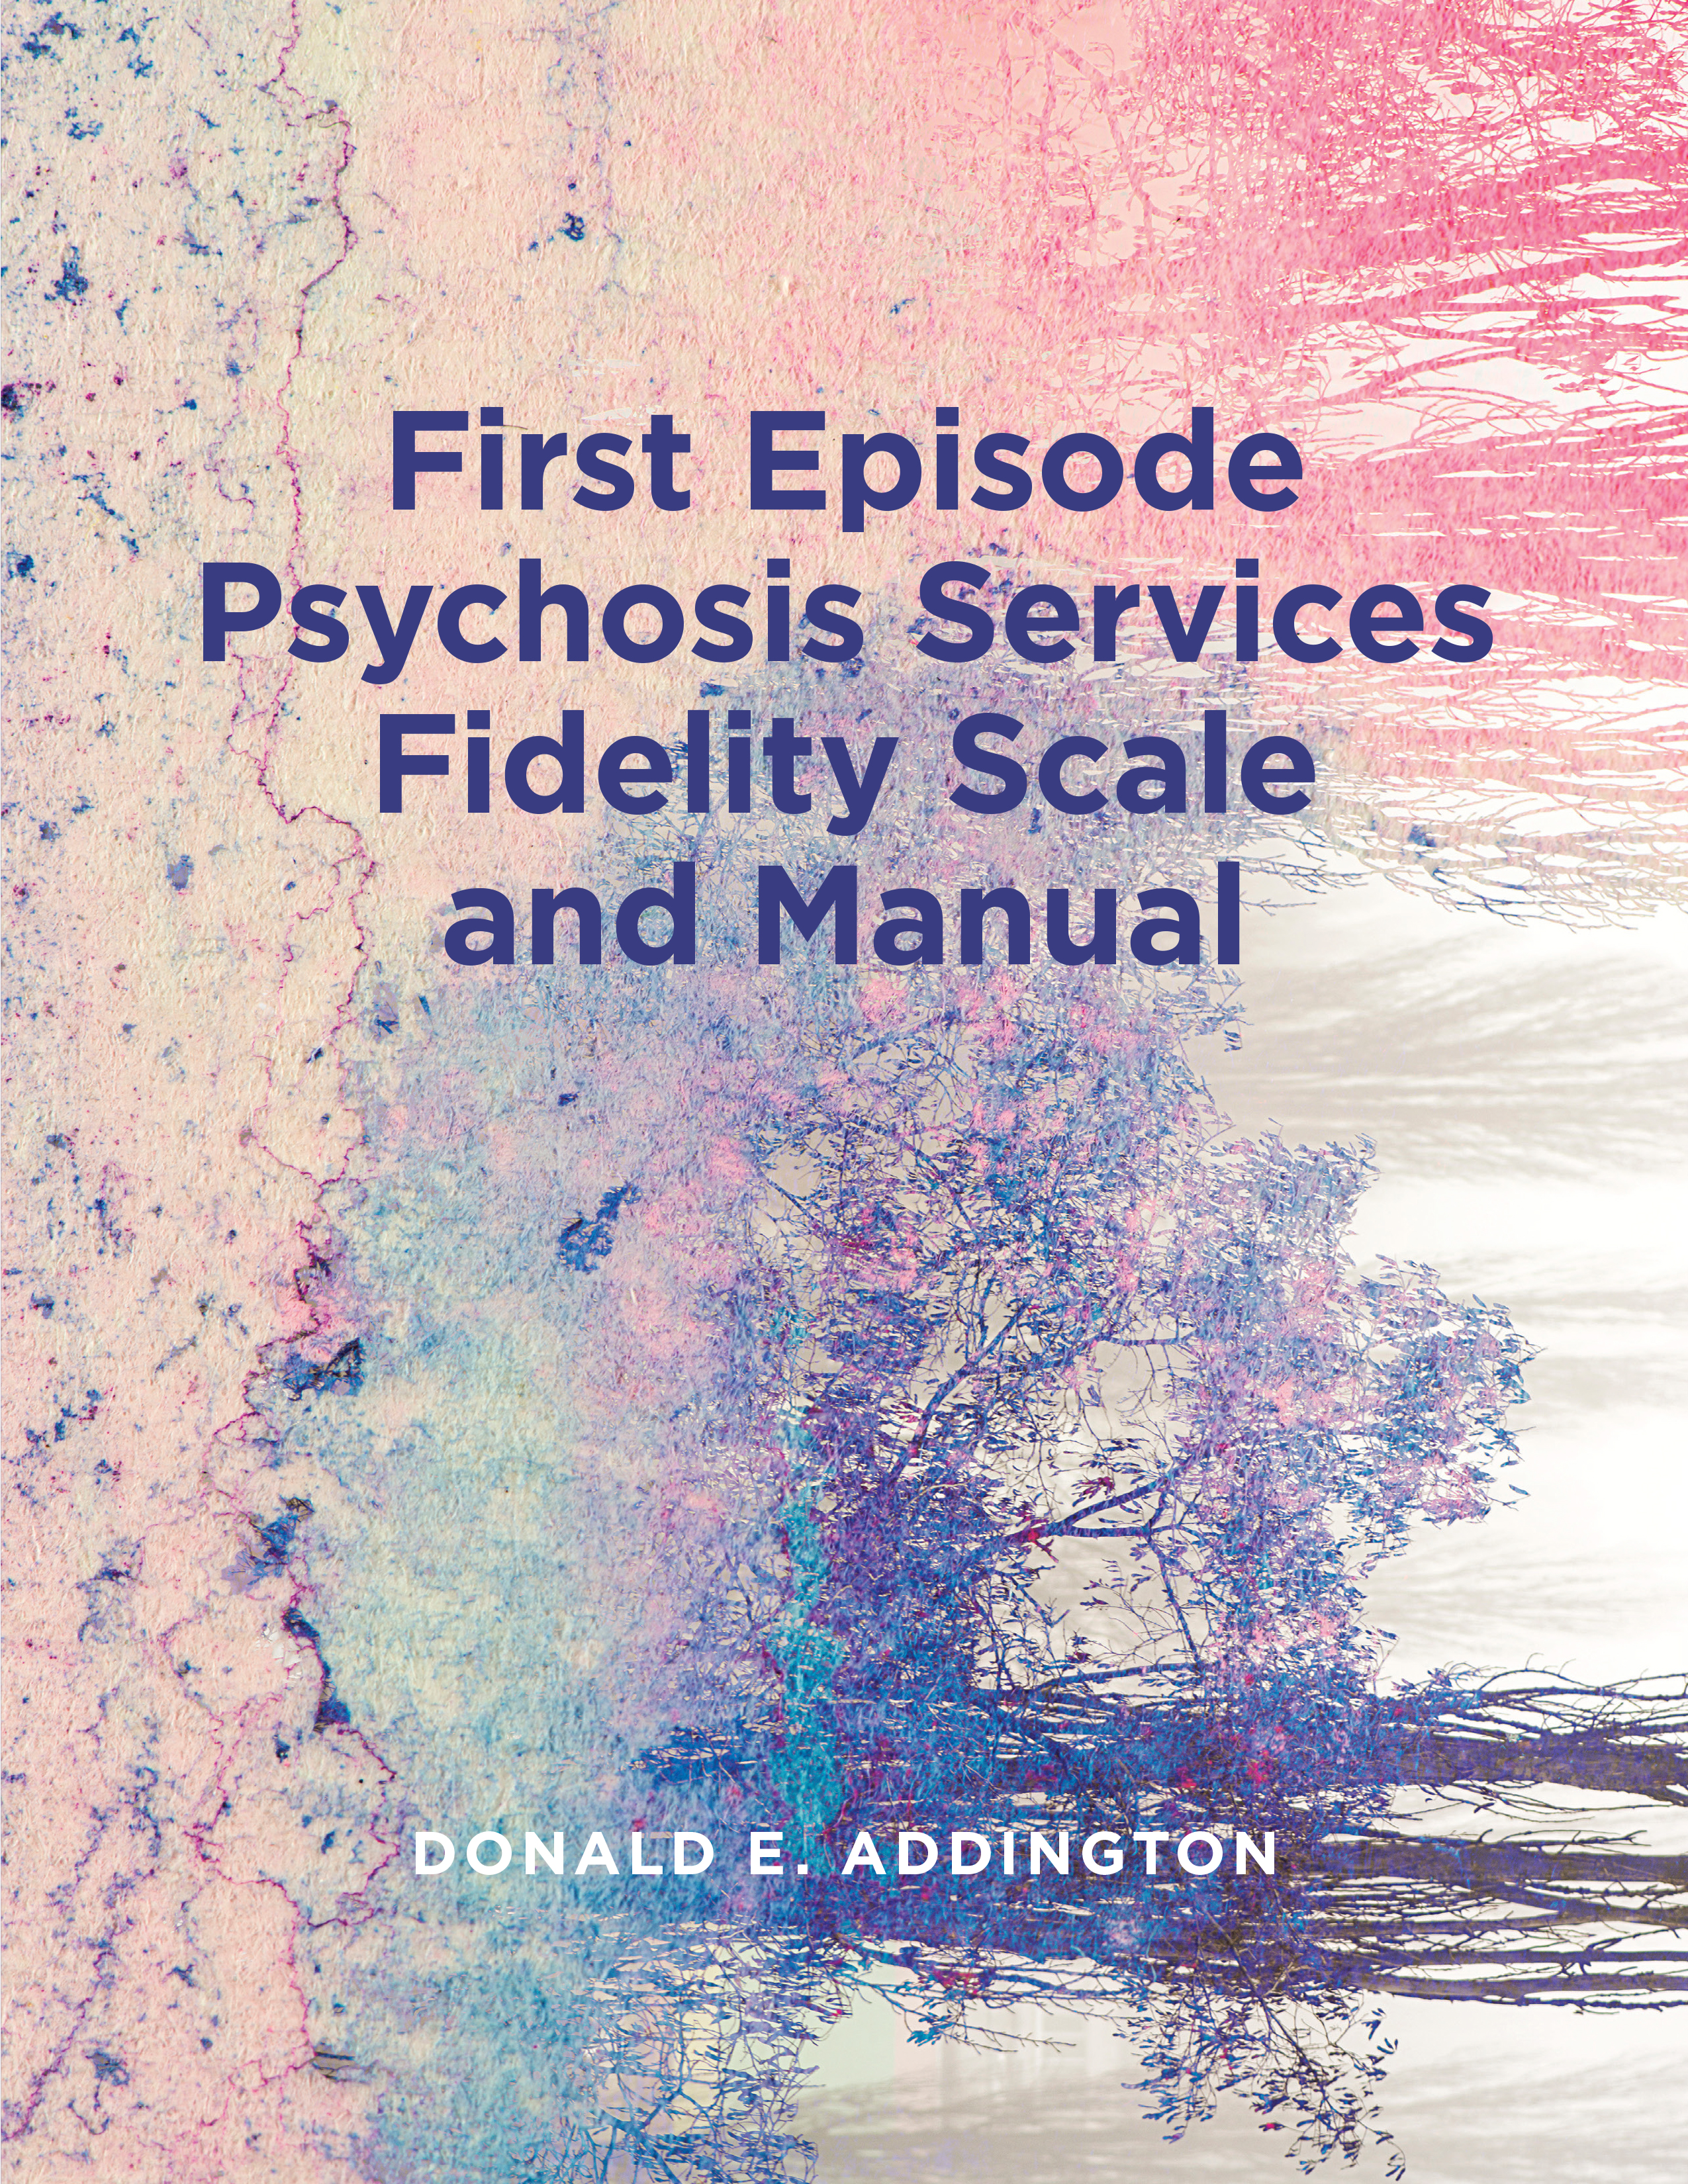 Book Cover Image for: First Episode Psychosis Services Fidelity Scale and Manual